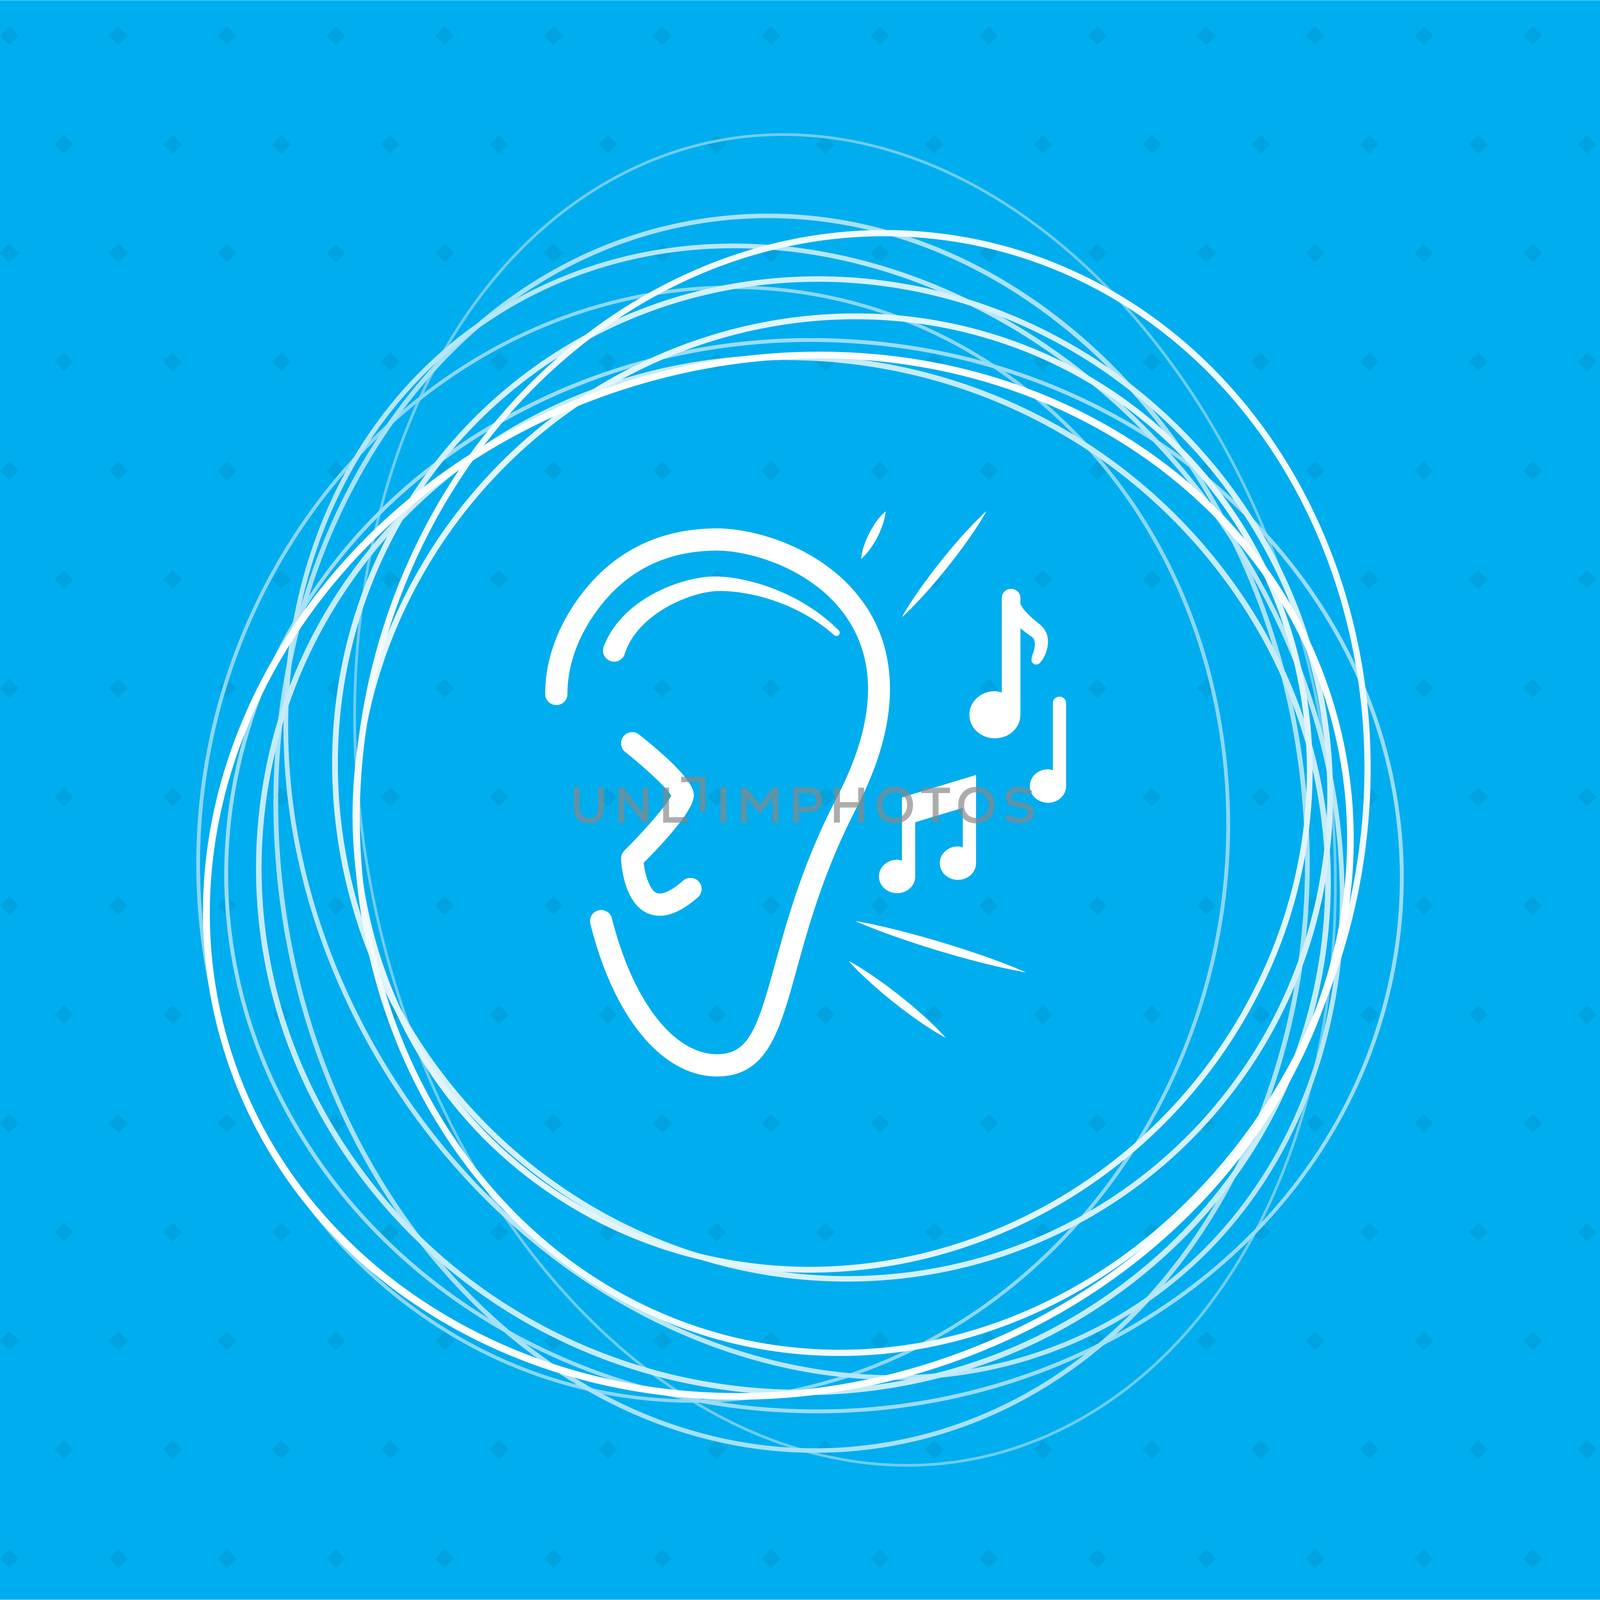 Ear listen sound signal icon on a blue background with abstract circles around and place for your text. illustration